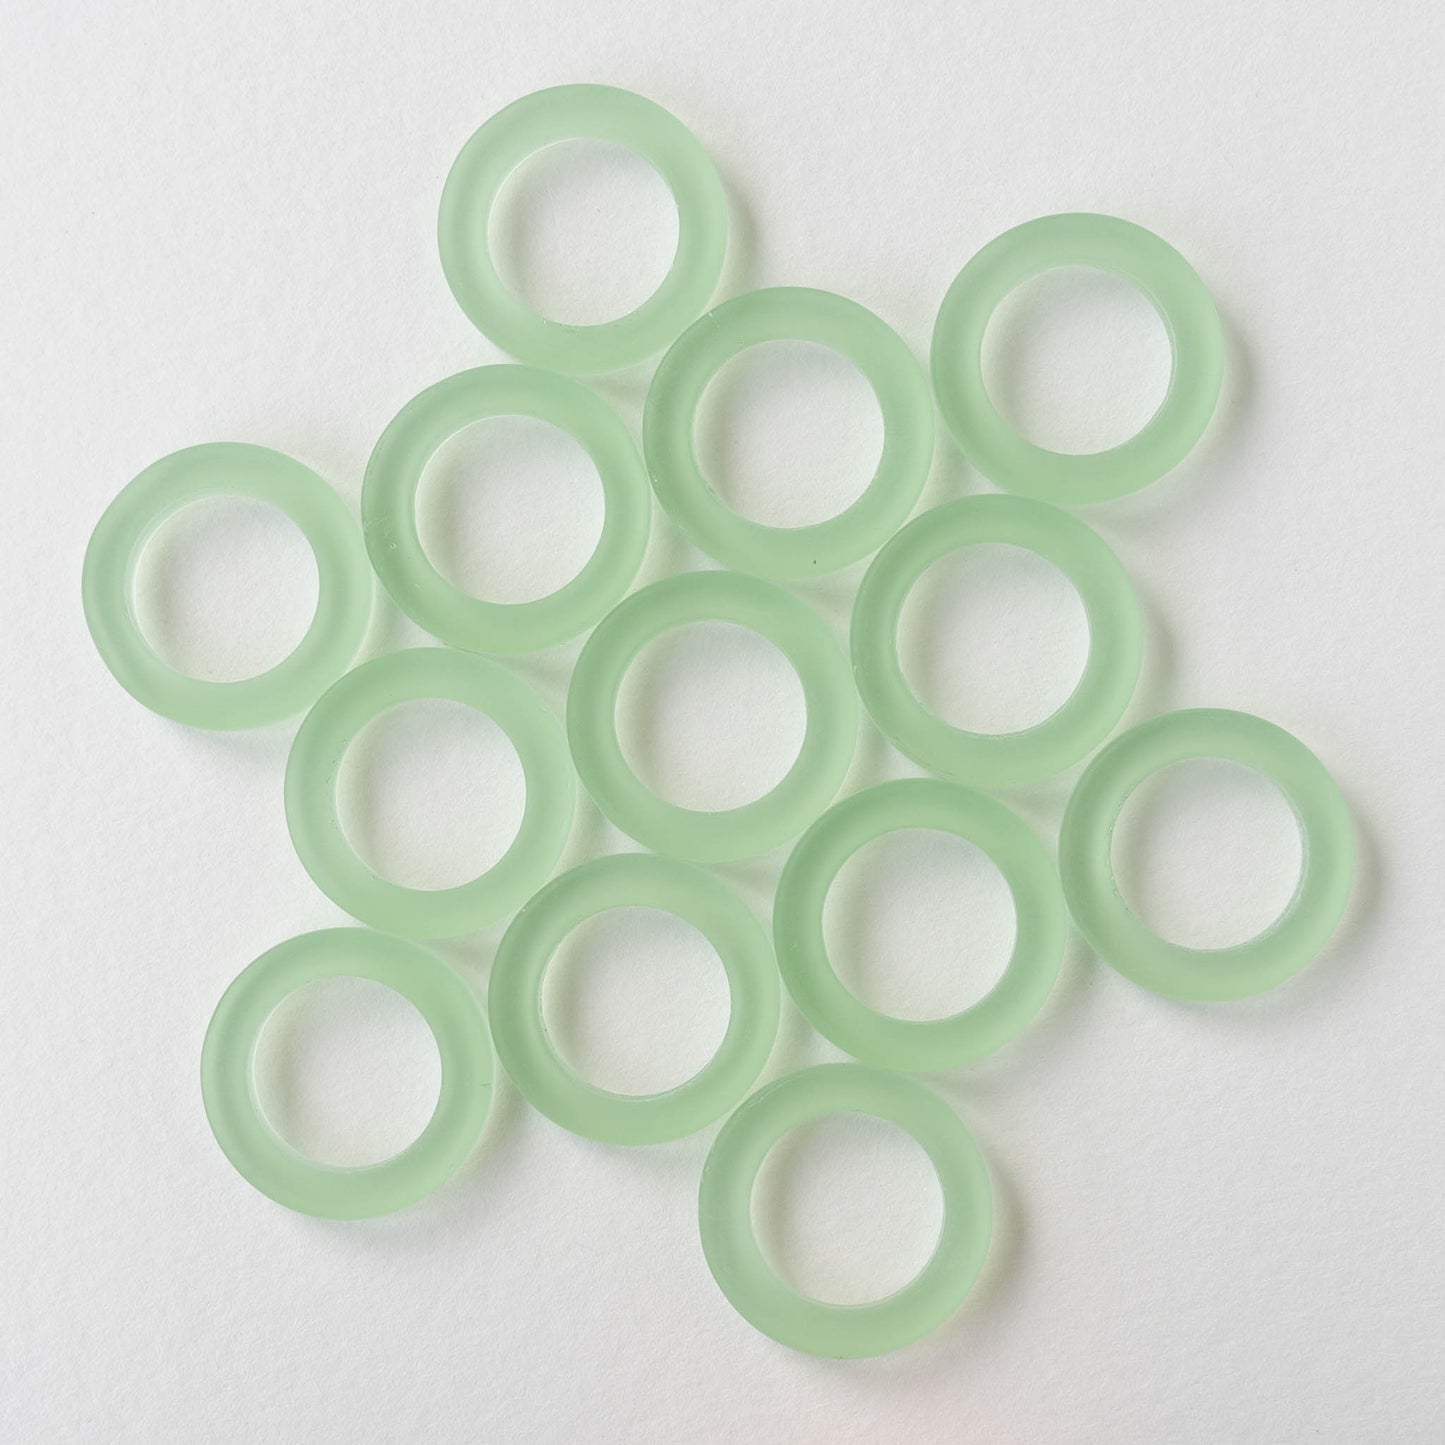 27mm Frosted Glass Rings - Light Green - 2 Rings